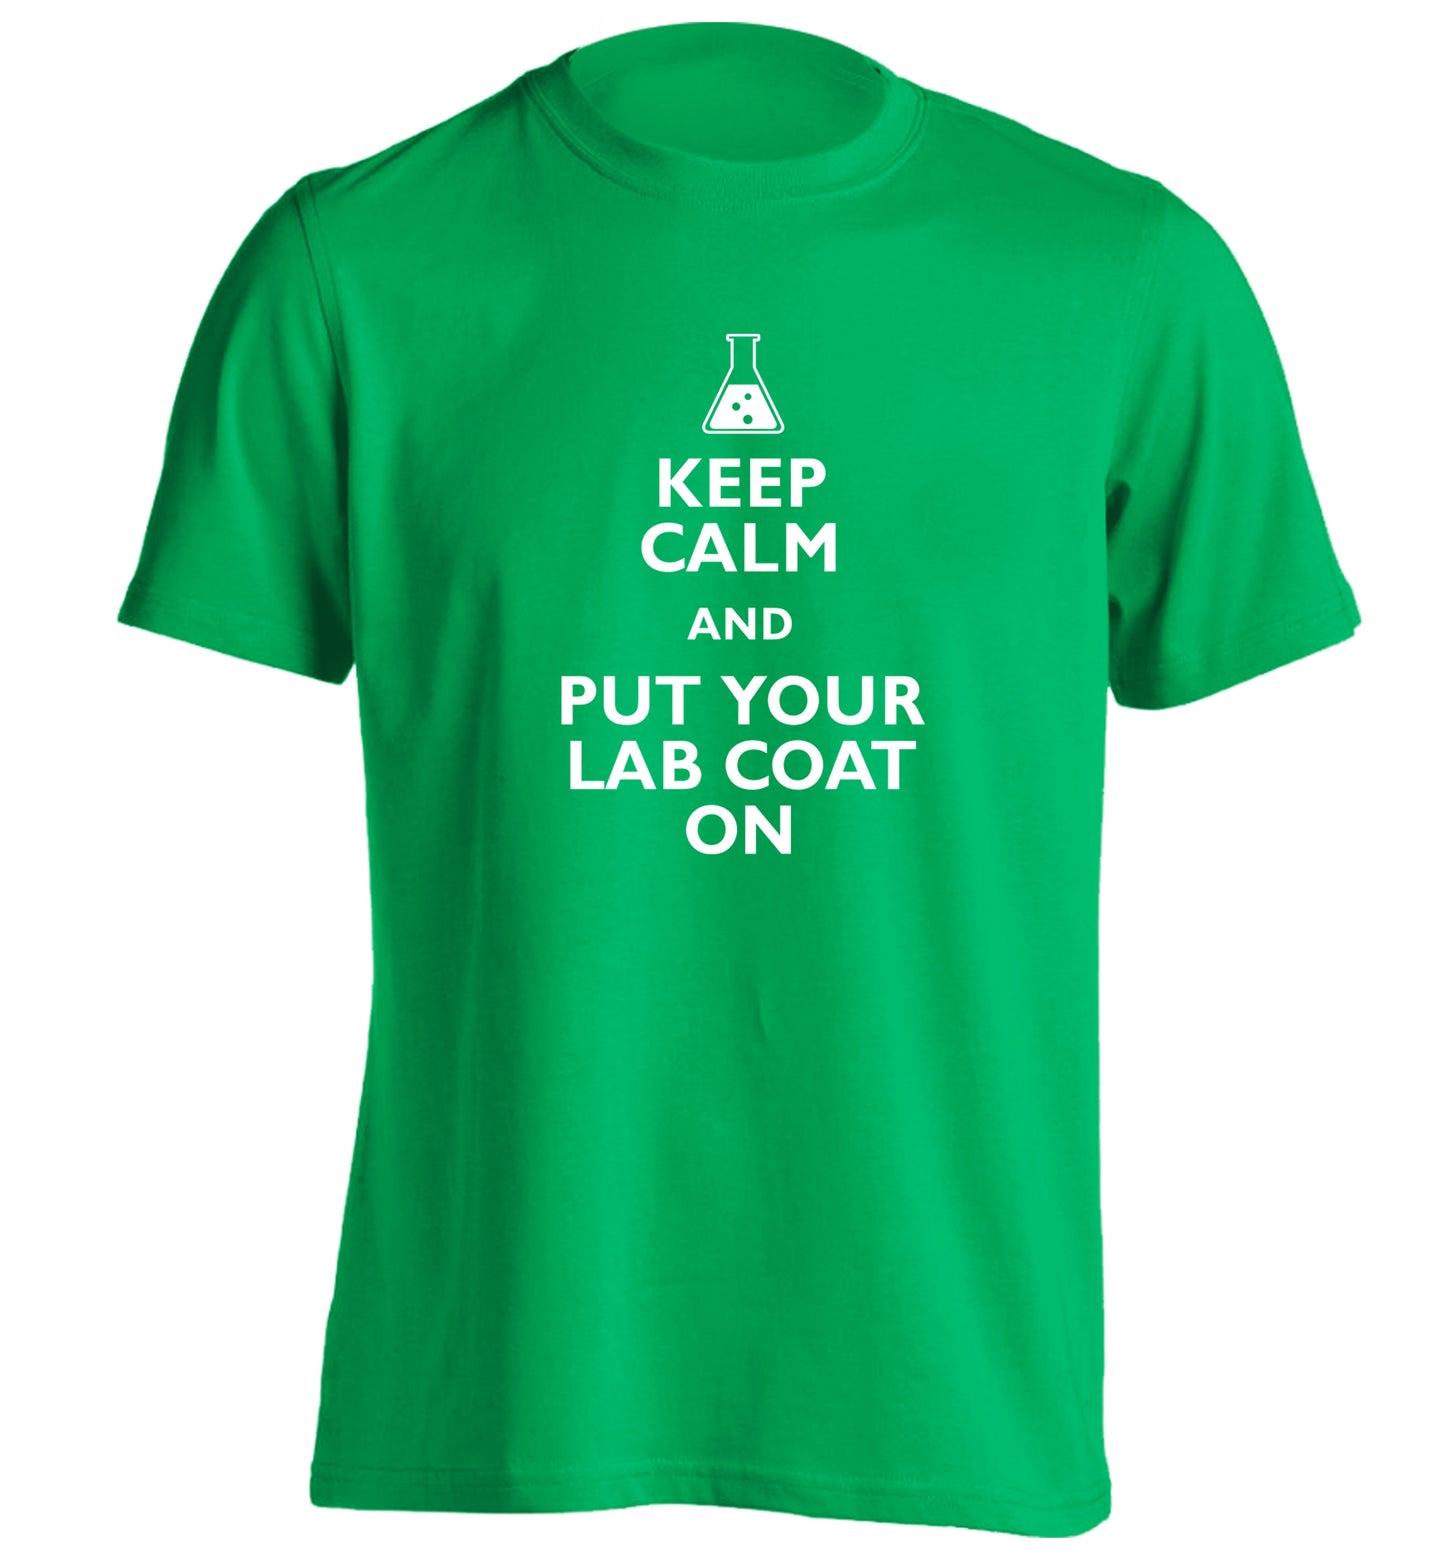 Keep calm and put your lab coat on adults unisex green Tshirt 2XL